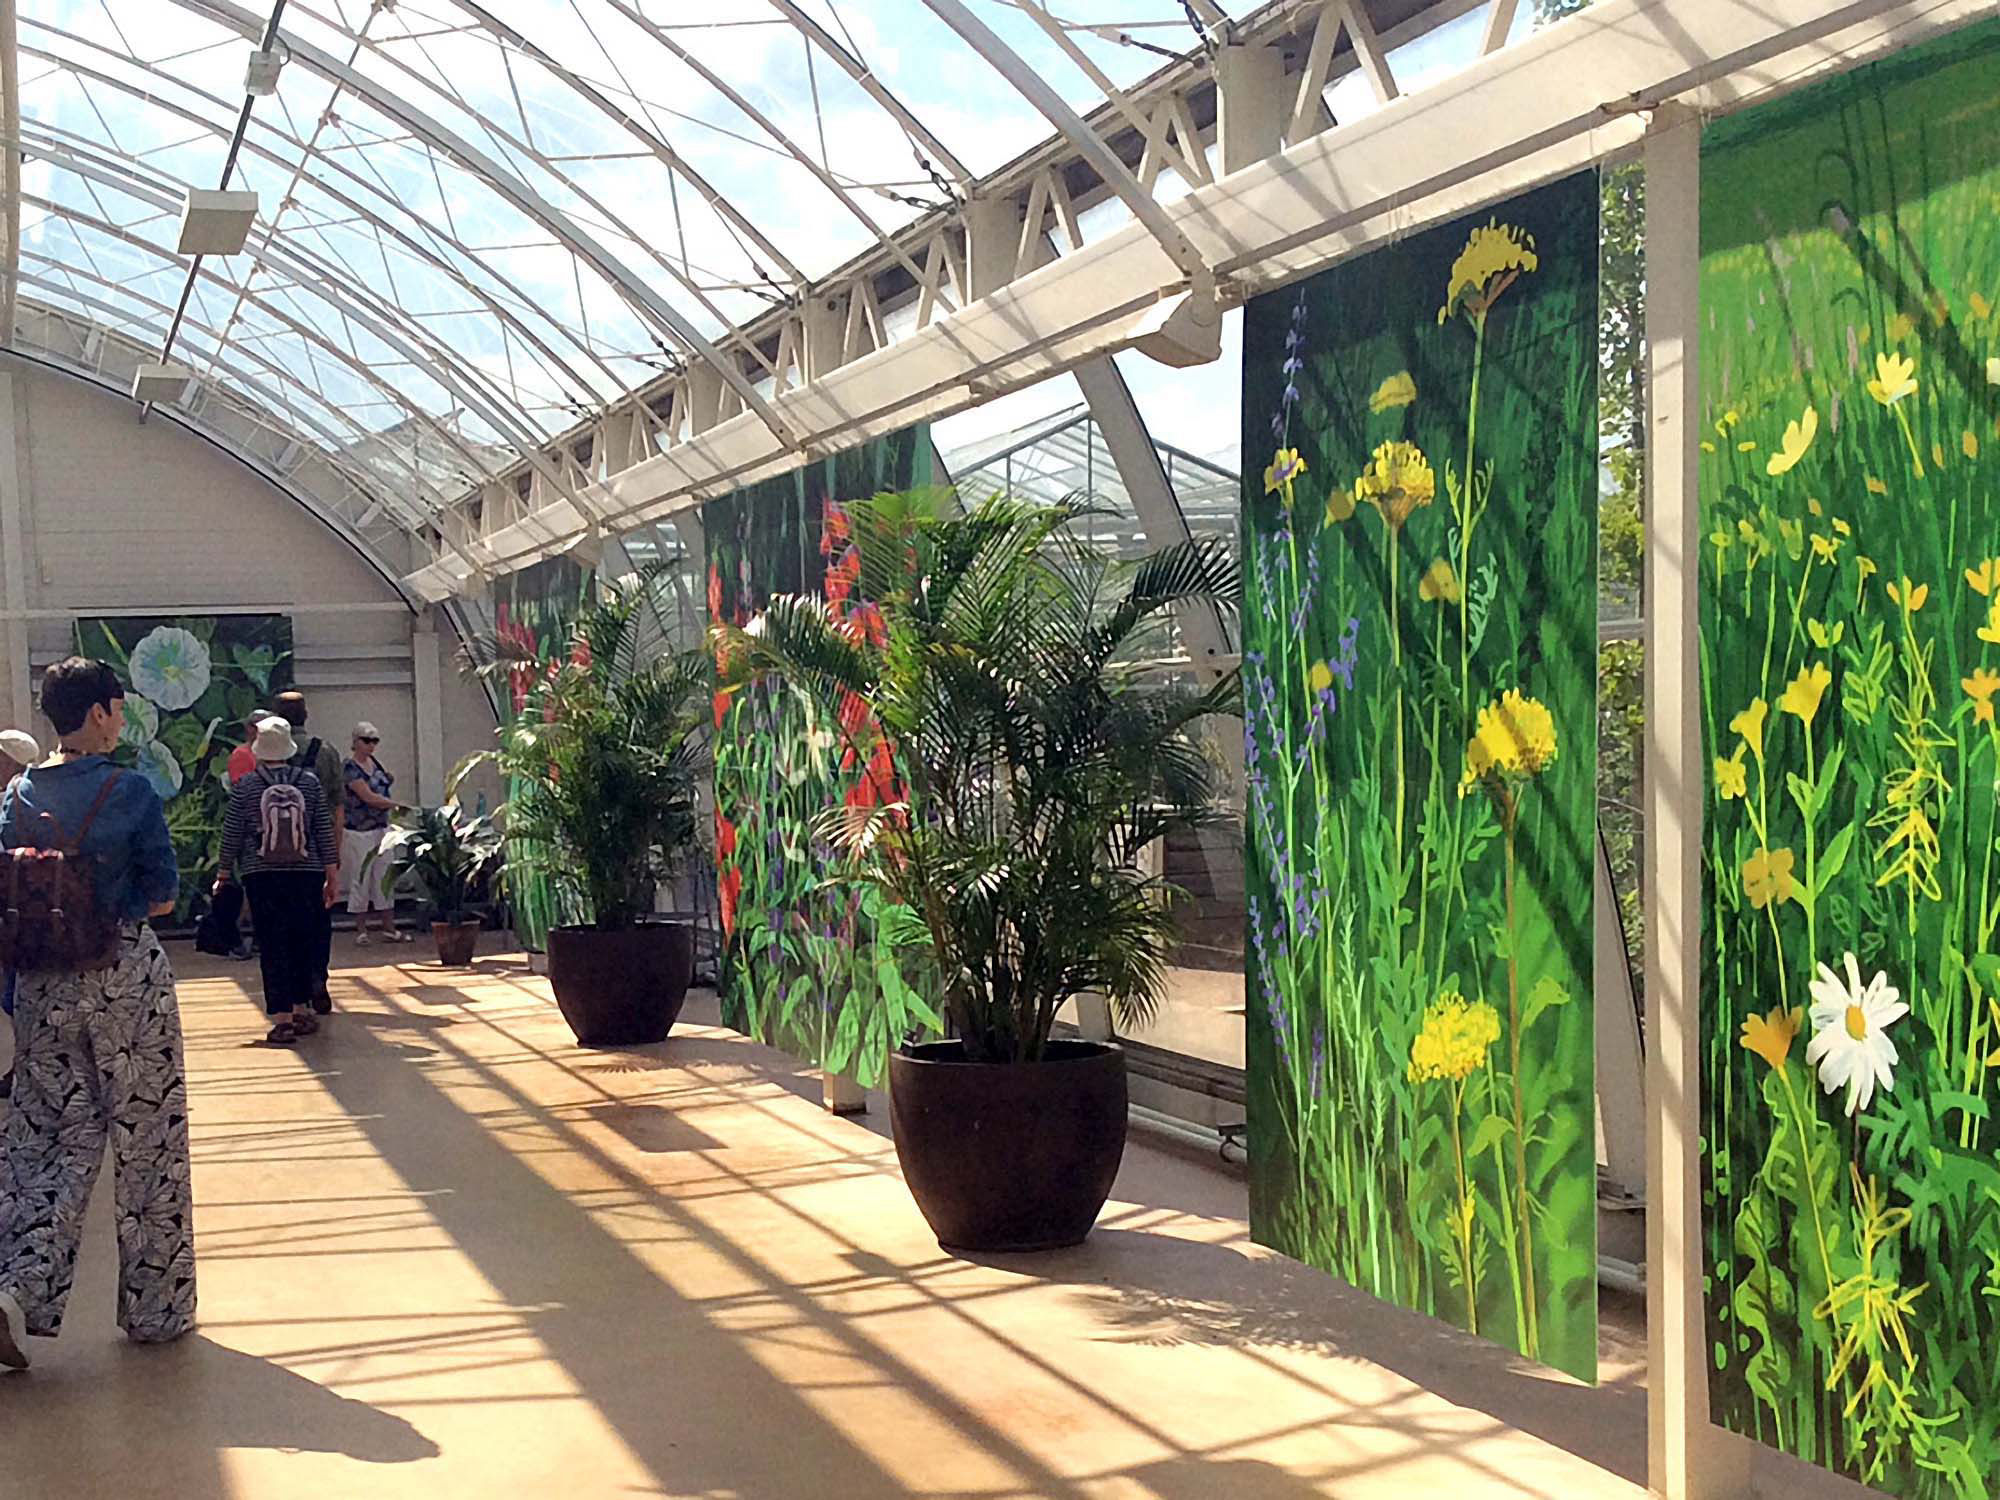 Collaboration, Andy Maitland, iPad artist - The Digital Garden® an exhibition of iPad drawings with augmented reality in collaboration with the Royal Horticultural Society 2018.